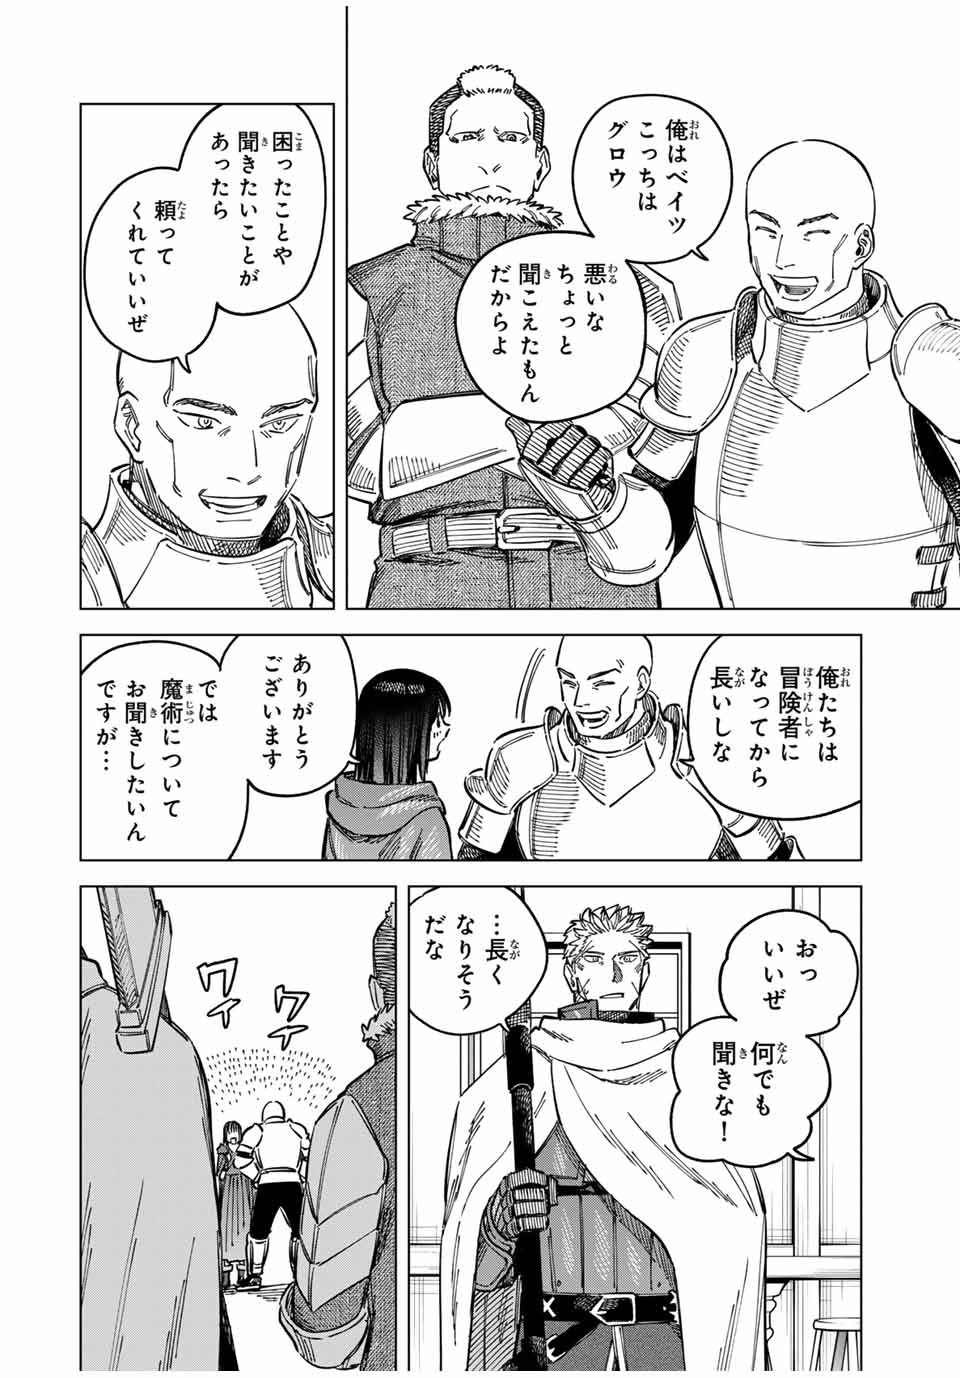 Witch and Mercenary 魔女と傭兵 第5.1話 - Page 14